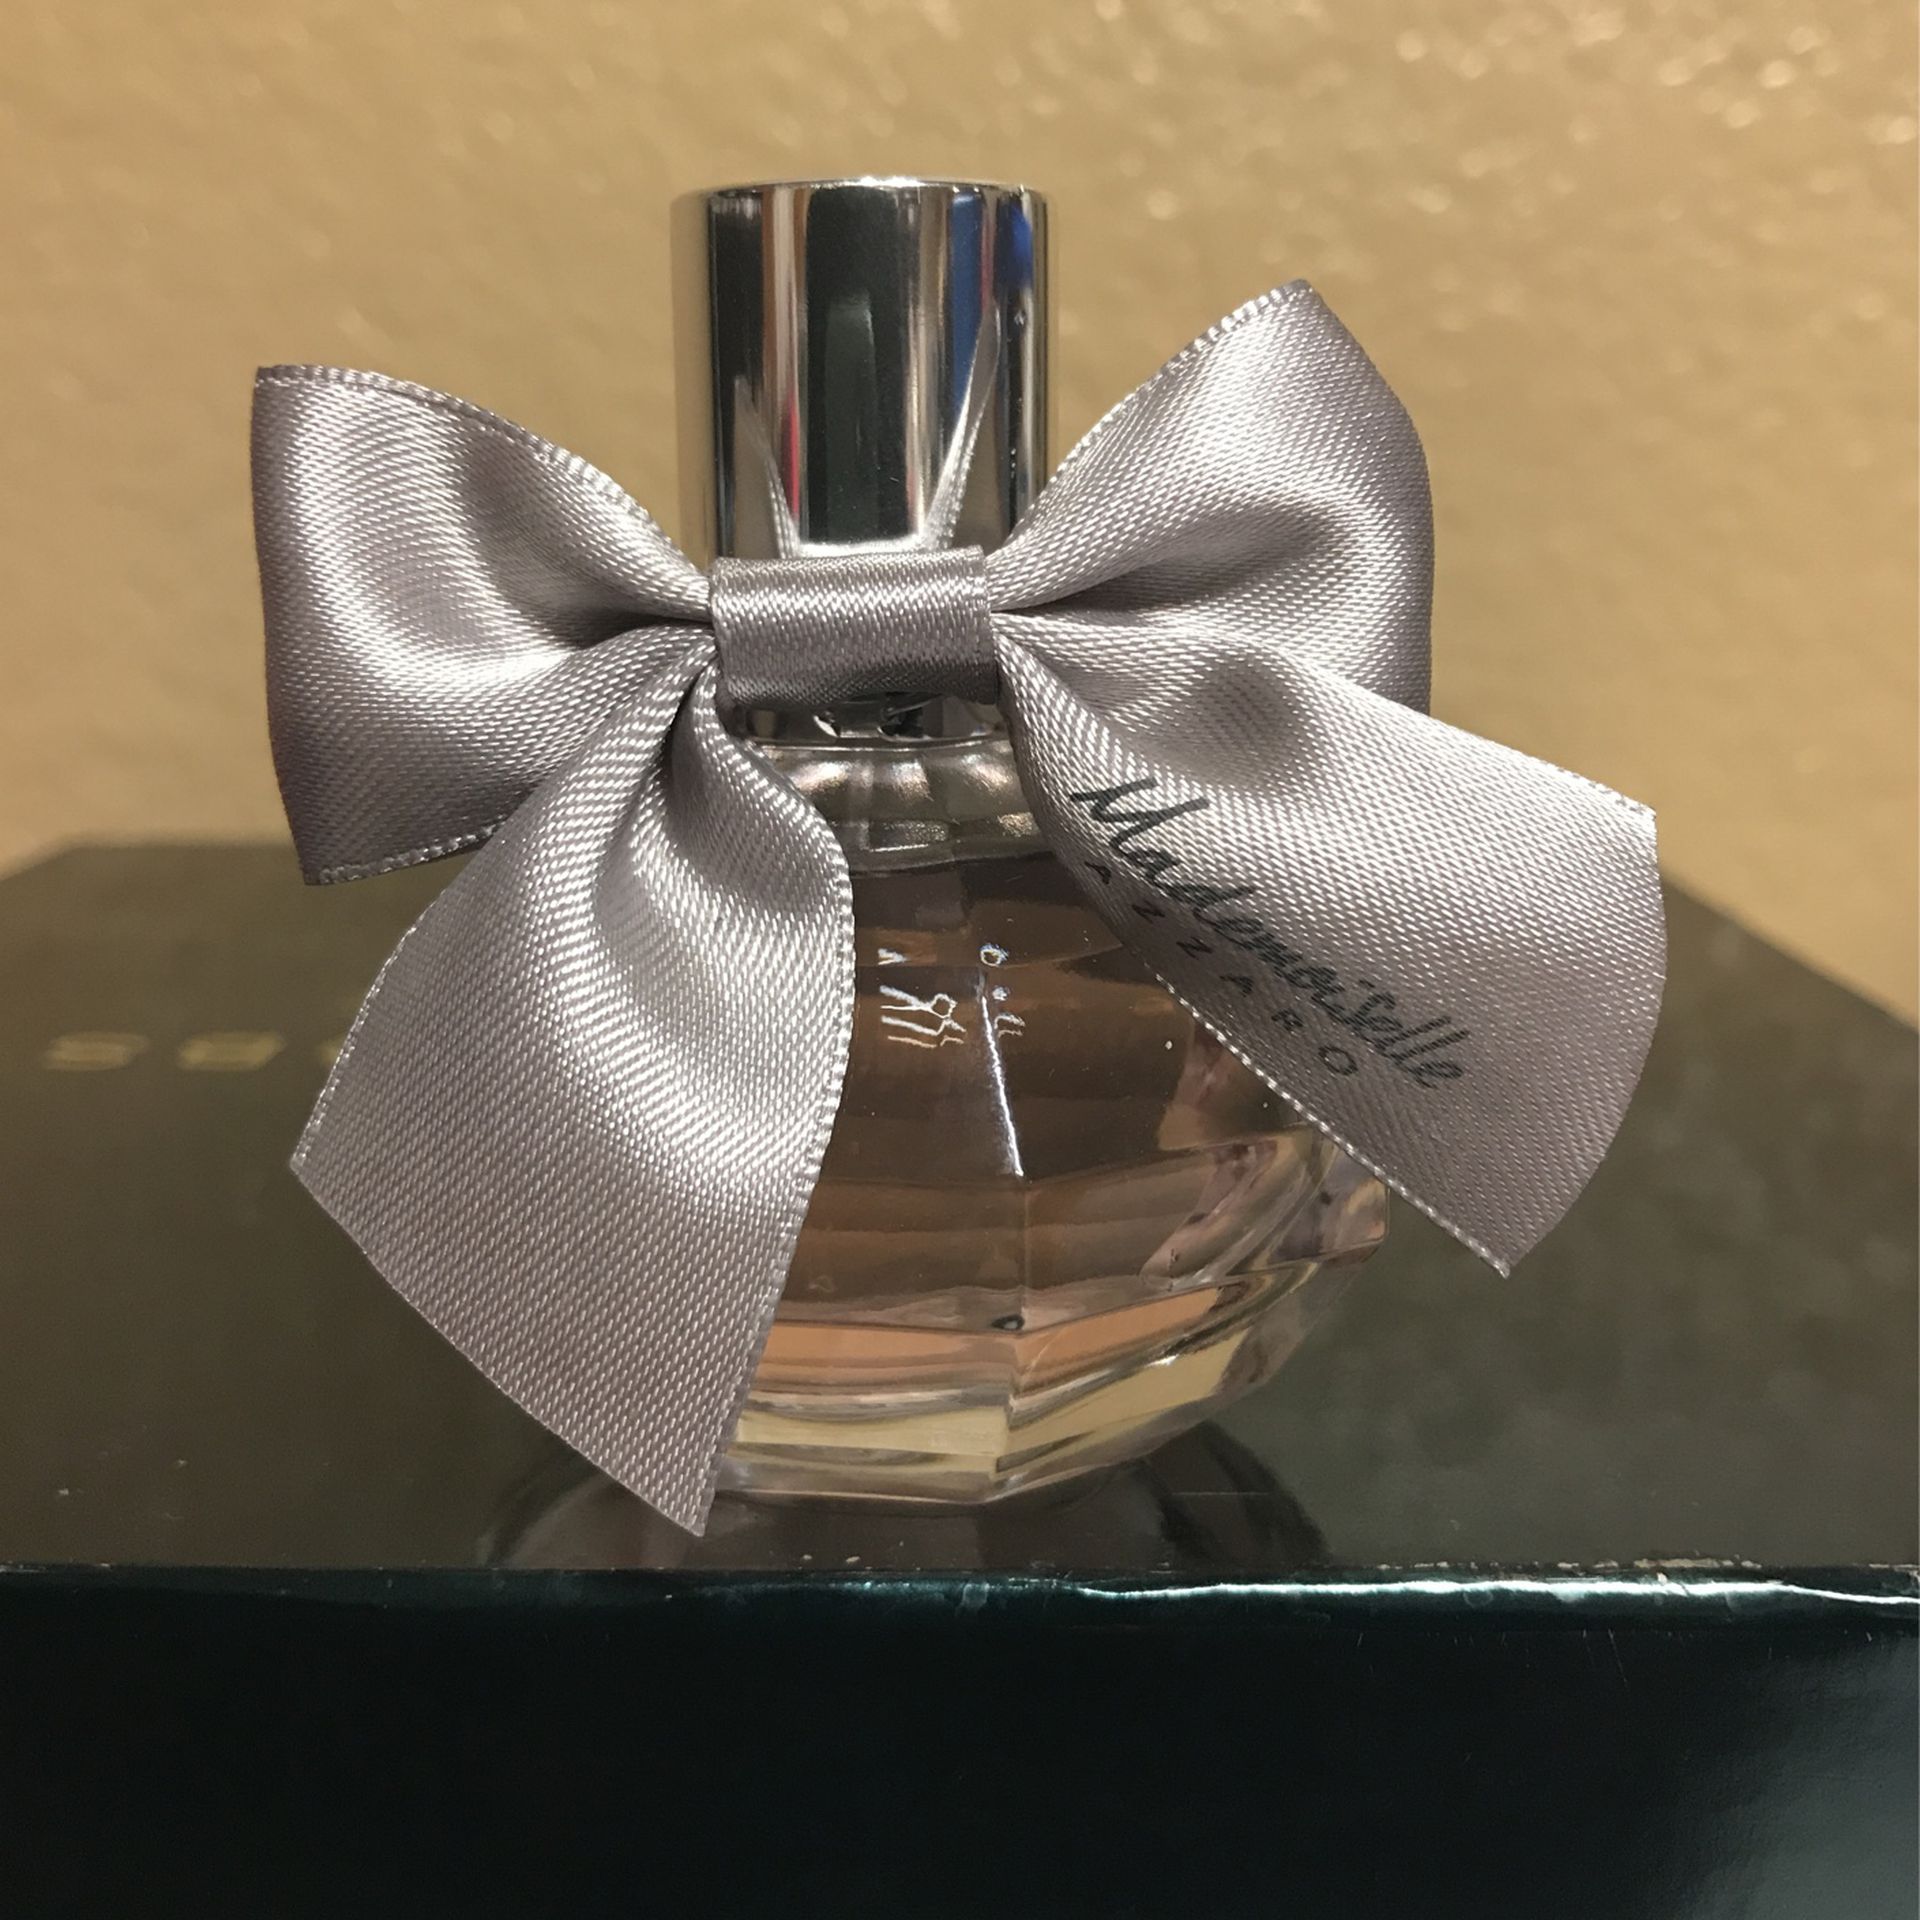 Azzaro Mademoiselle Perfume for Sale in Rancho Cucamonga, CA - OfferUp